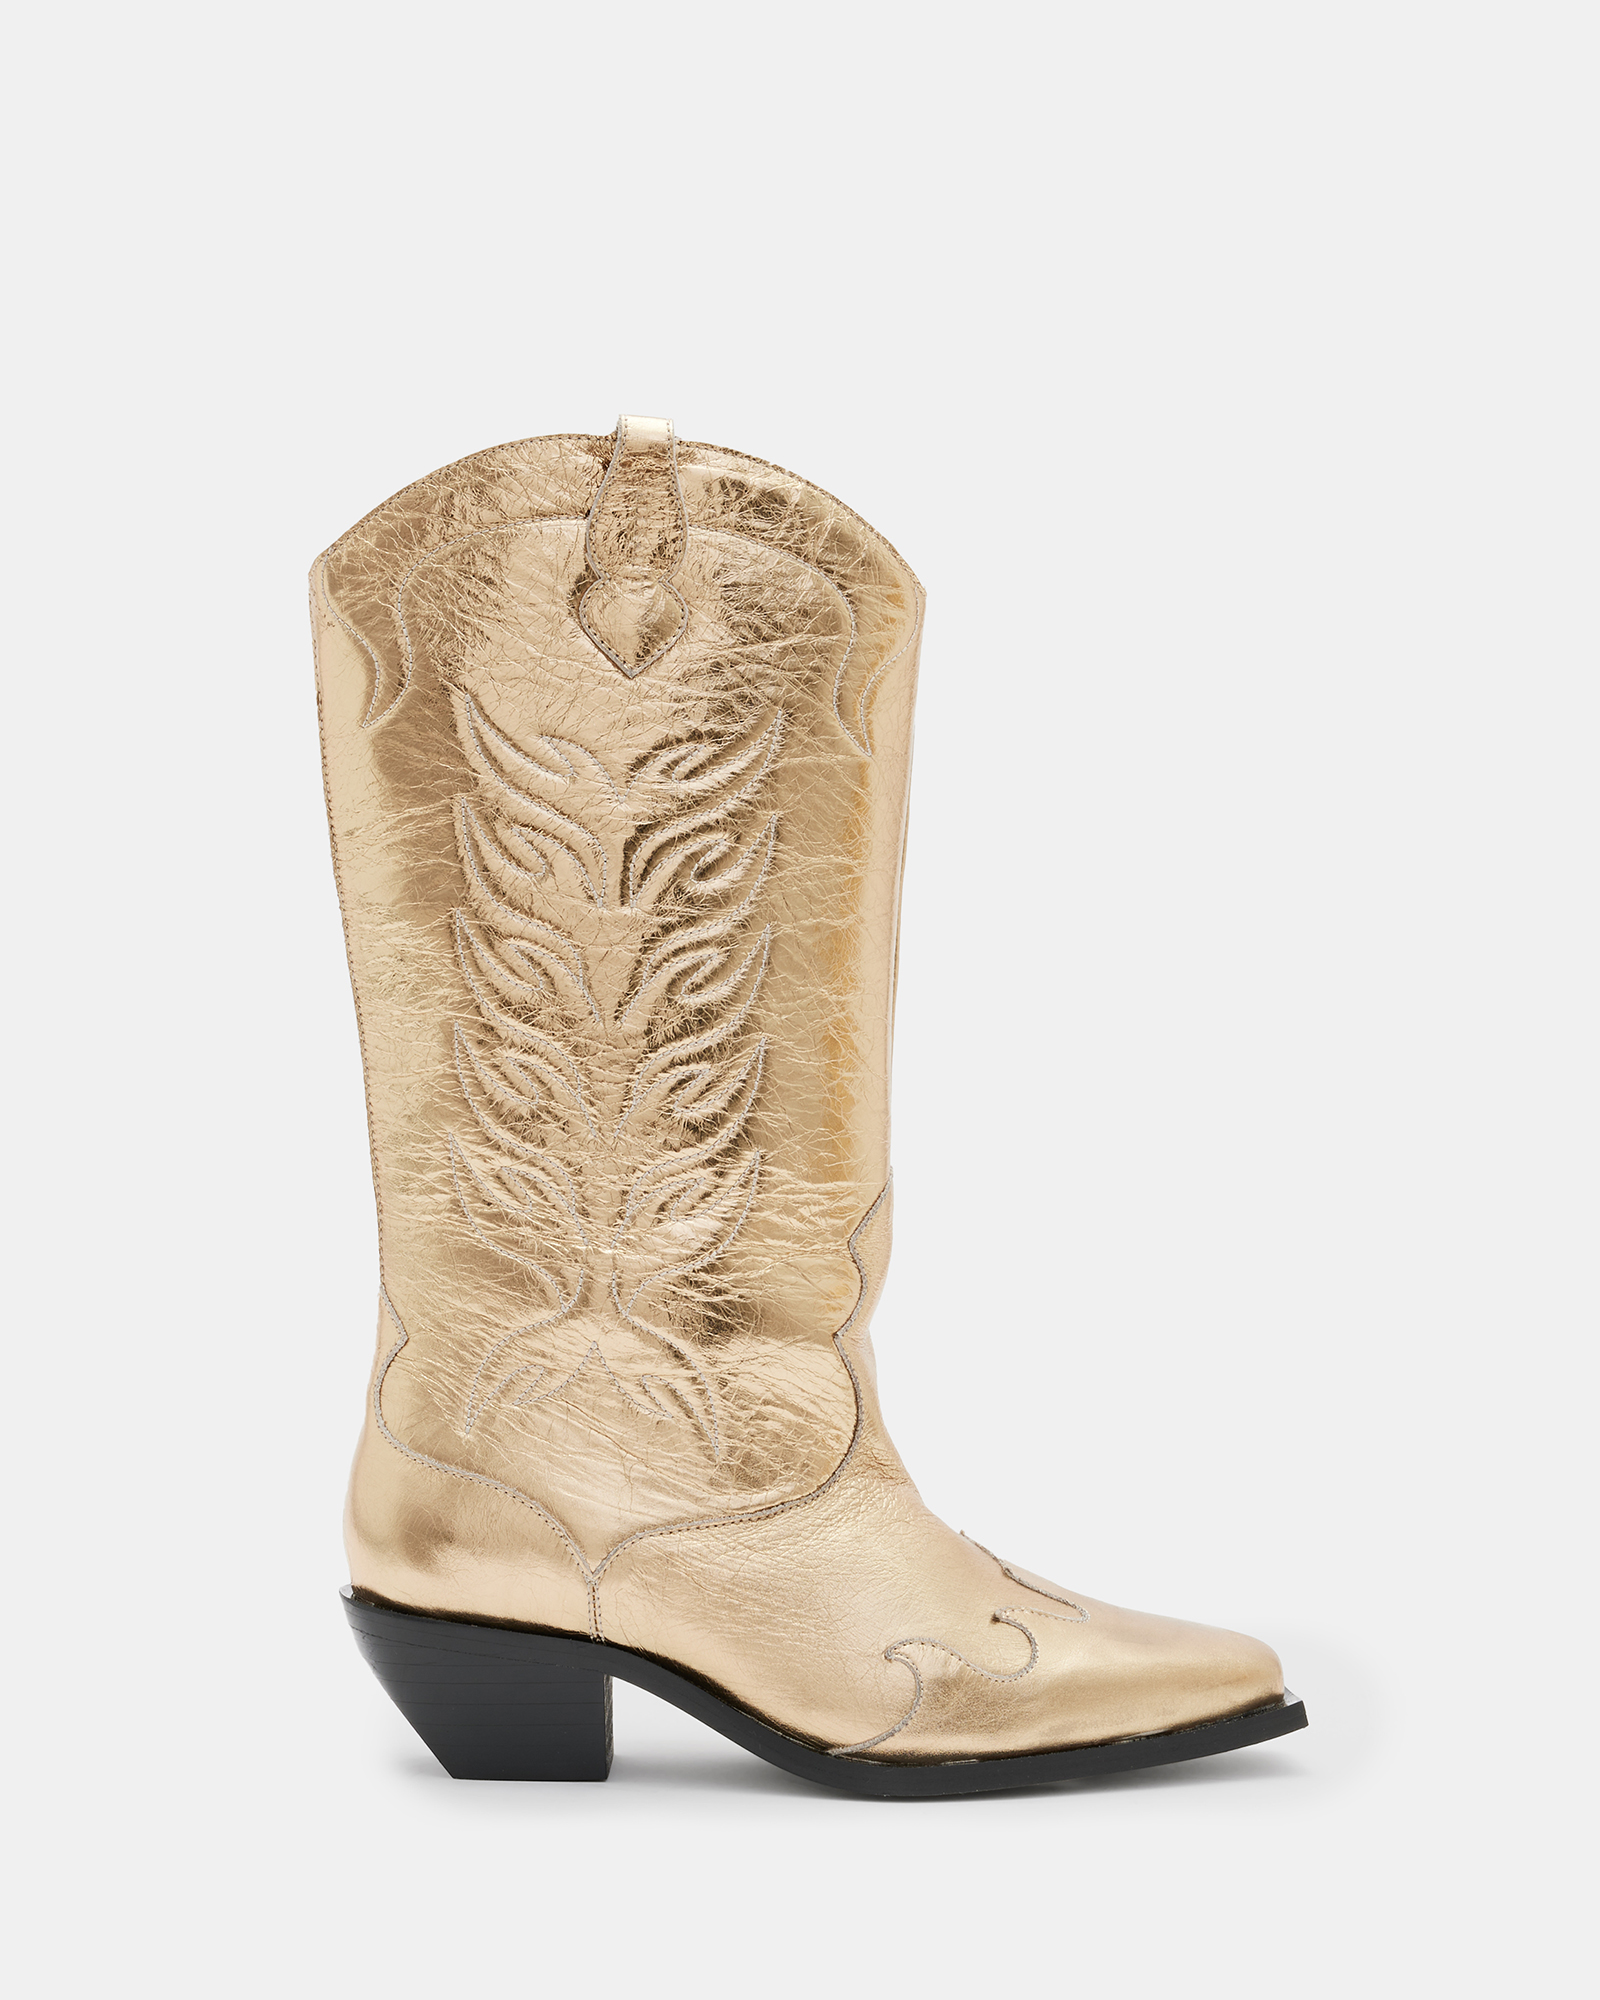 Shop Allsaints Dolly Western Metallic Leather Boots, In Metallic Gold